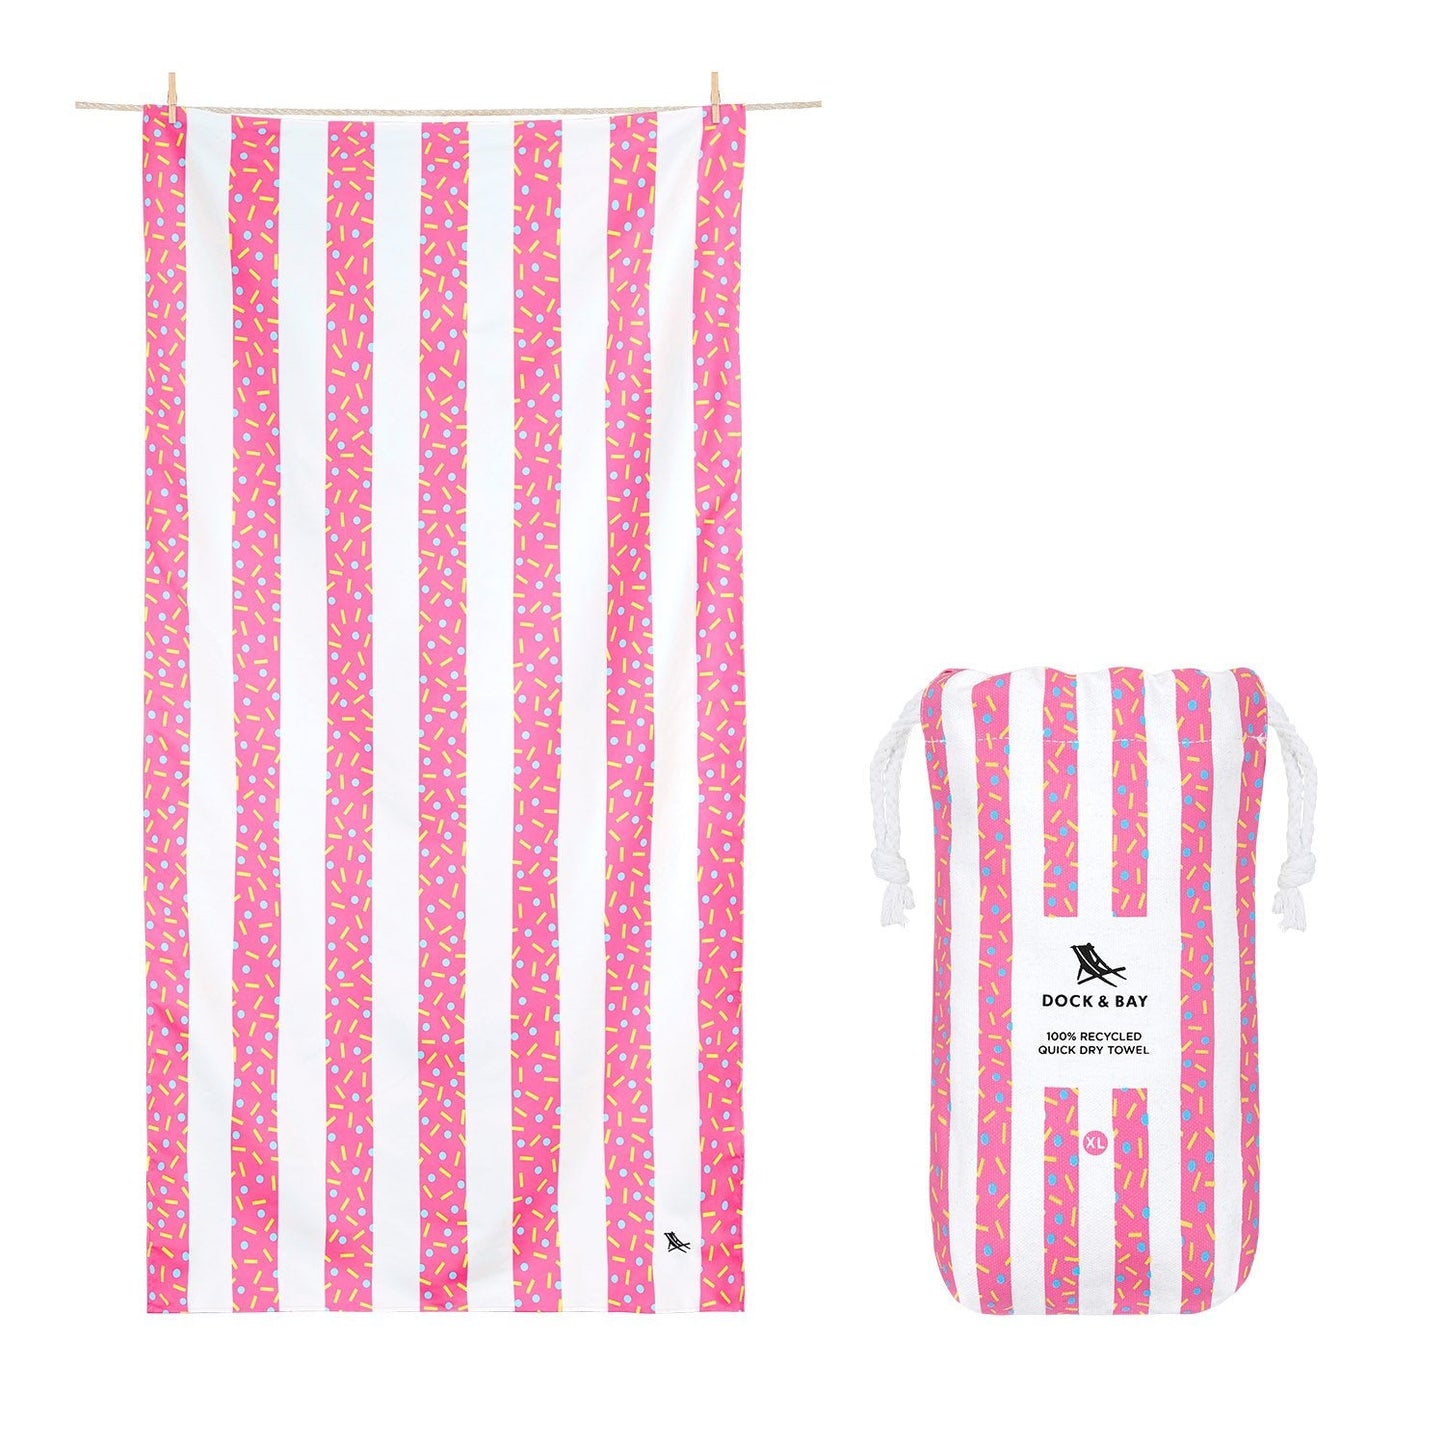 Celebrations Collection XLarge Towel - Cupcake Sprinkles Gifts Dock & Bay   